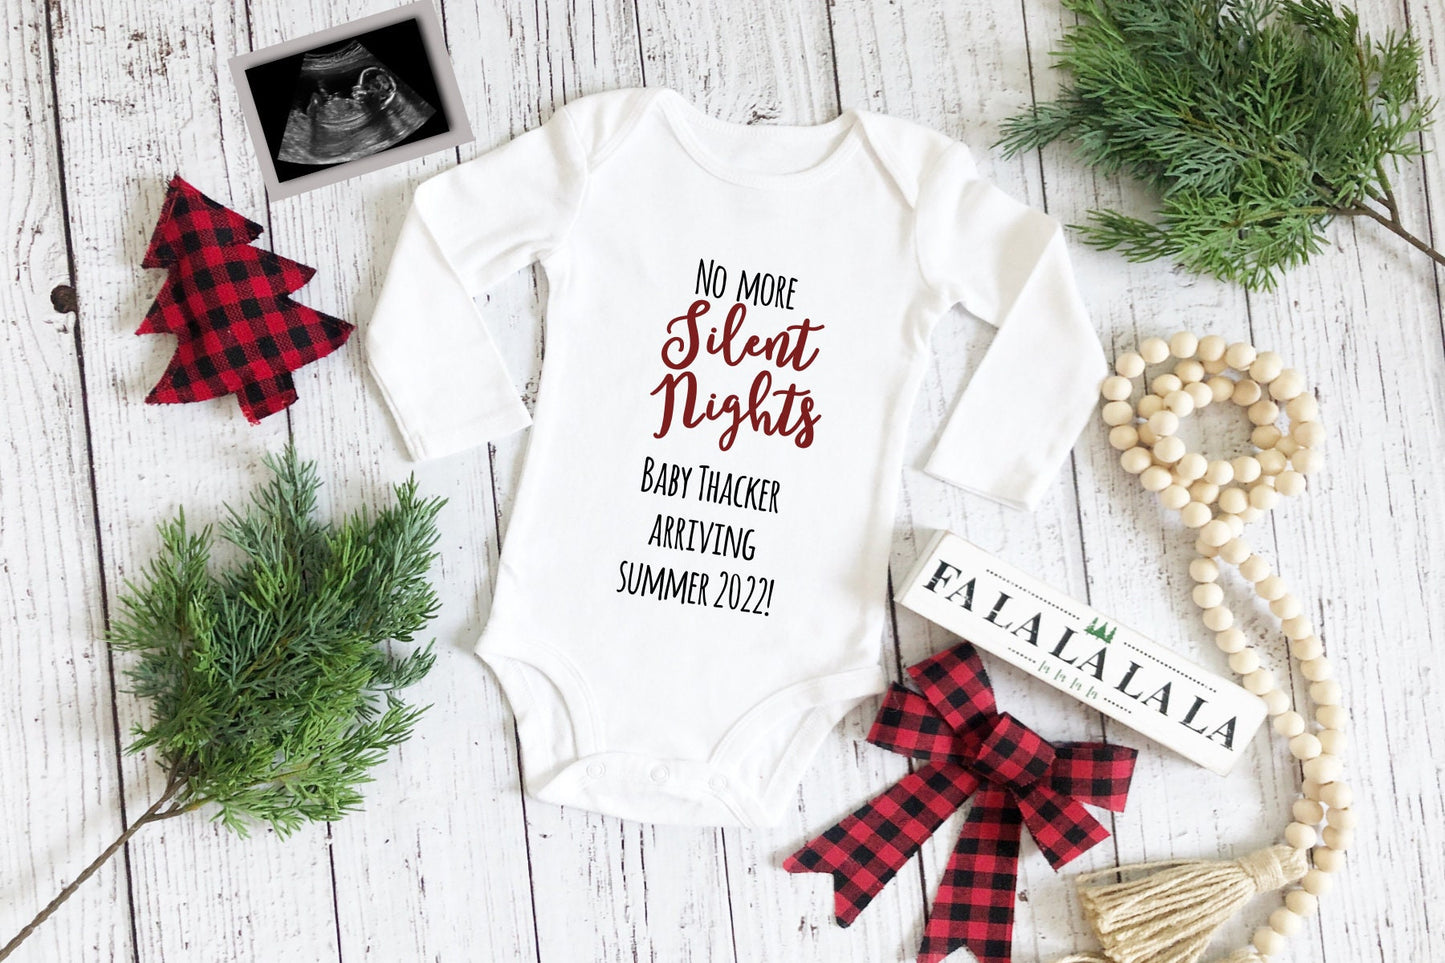 Digital Christmas Pregnancy Announcement for Social Media or Emailing to Family, You Edit Digital Pregnancy Announce, FaLaLaLaLa